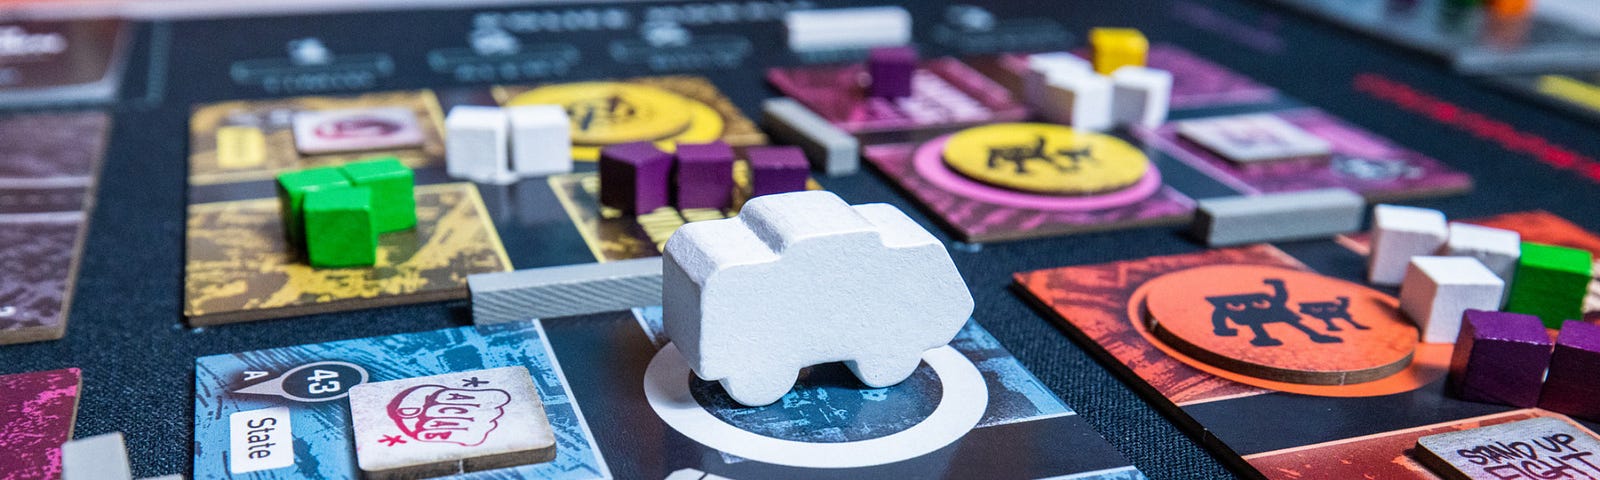 A corner of the Bloc by Bloc: Uprising board. A white police van meeple sits in a white ring on the Liberated Telecom Network Hub district tile, along with 5 white police squad cubes. A graffiti token covers a shop icon on the tile. Adjacent and kitty corner to the tile are other liberated district tiles with an assortment of bloc and police cubes, graffiti tokens, and barricades in between.